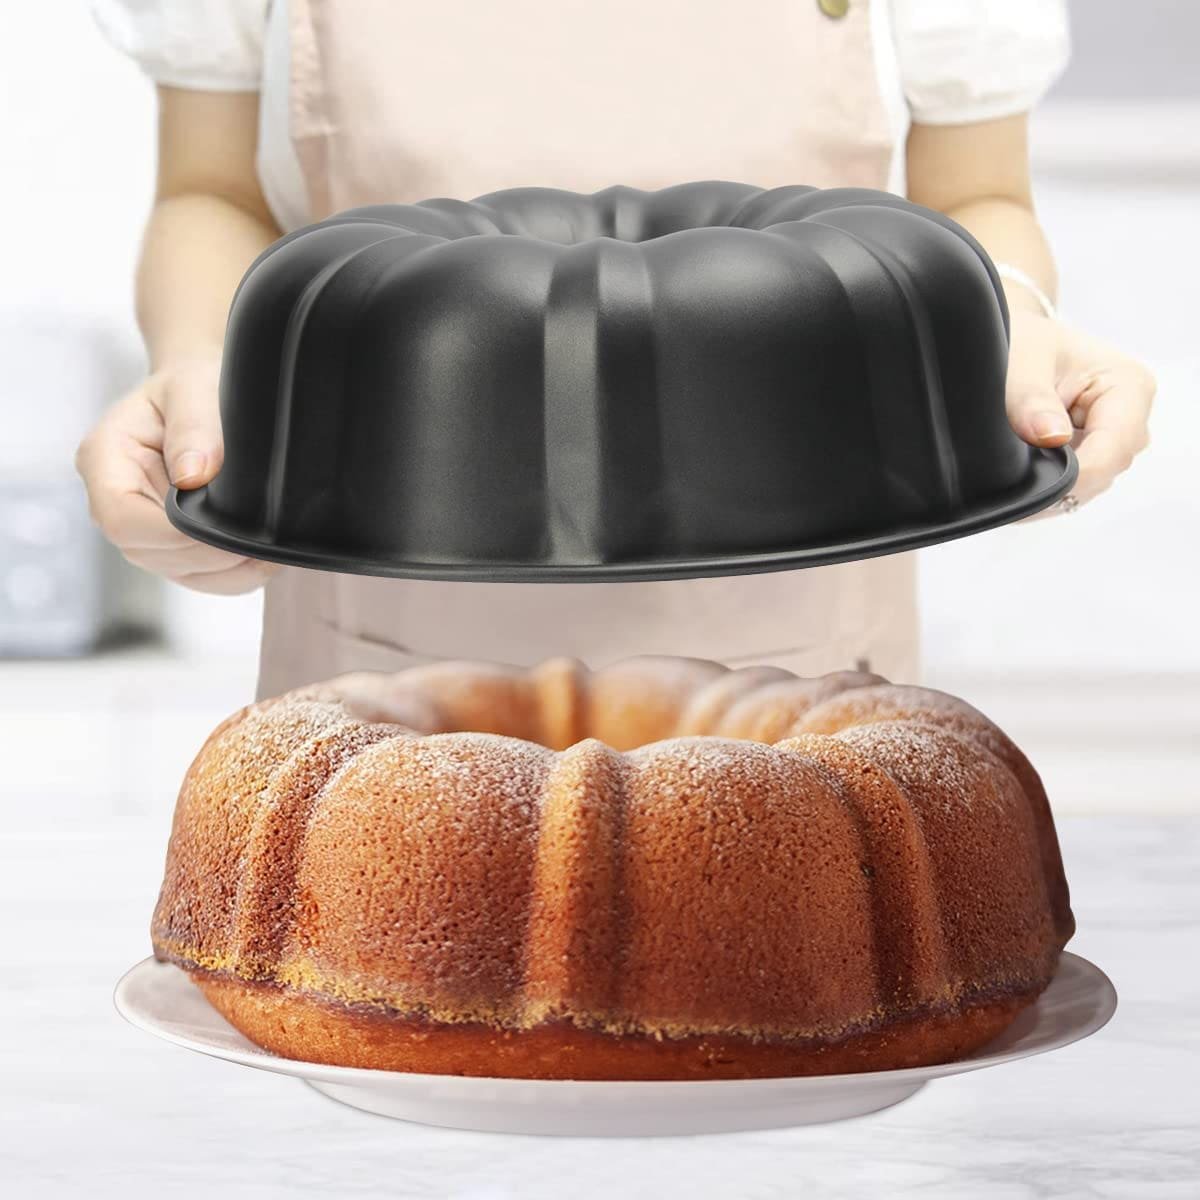 jioko 10 Inch Cake Pan, Non-Stick Fluted Tube Cake Pans for Baking,  Bavarois, Brownie, Jello, Flan, Meatloaf